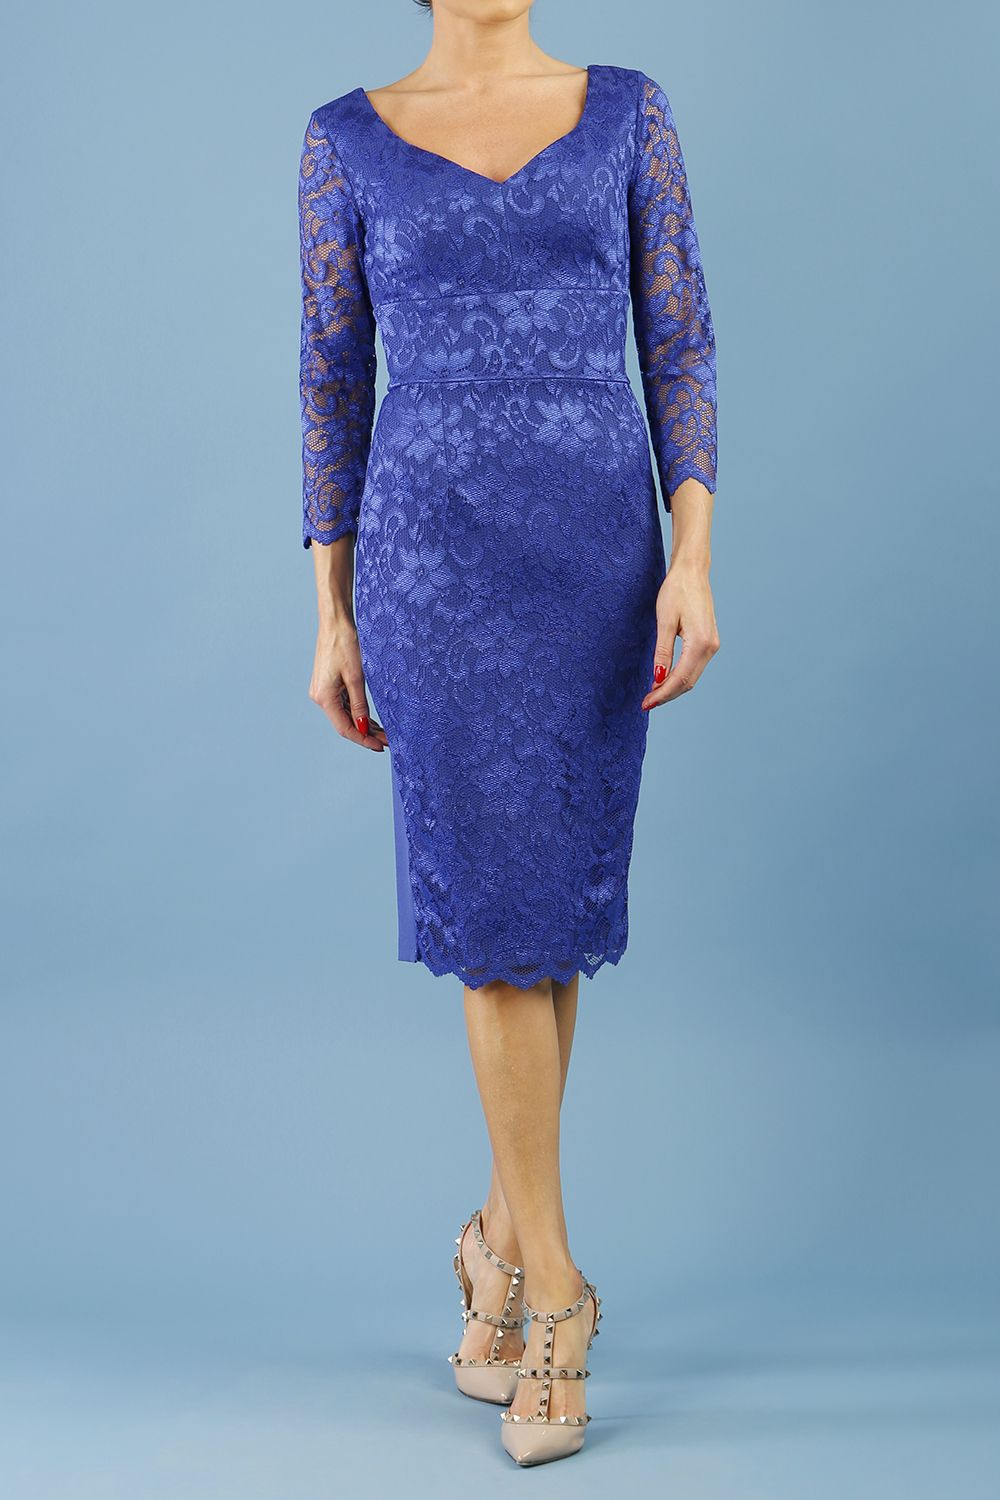 model is wearing diva catwalk bucklebury lace dress with sleeved and low neckline in riviera blue front